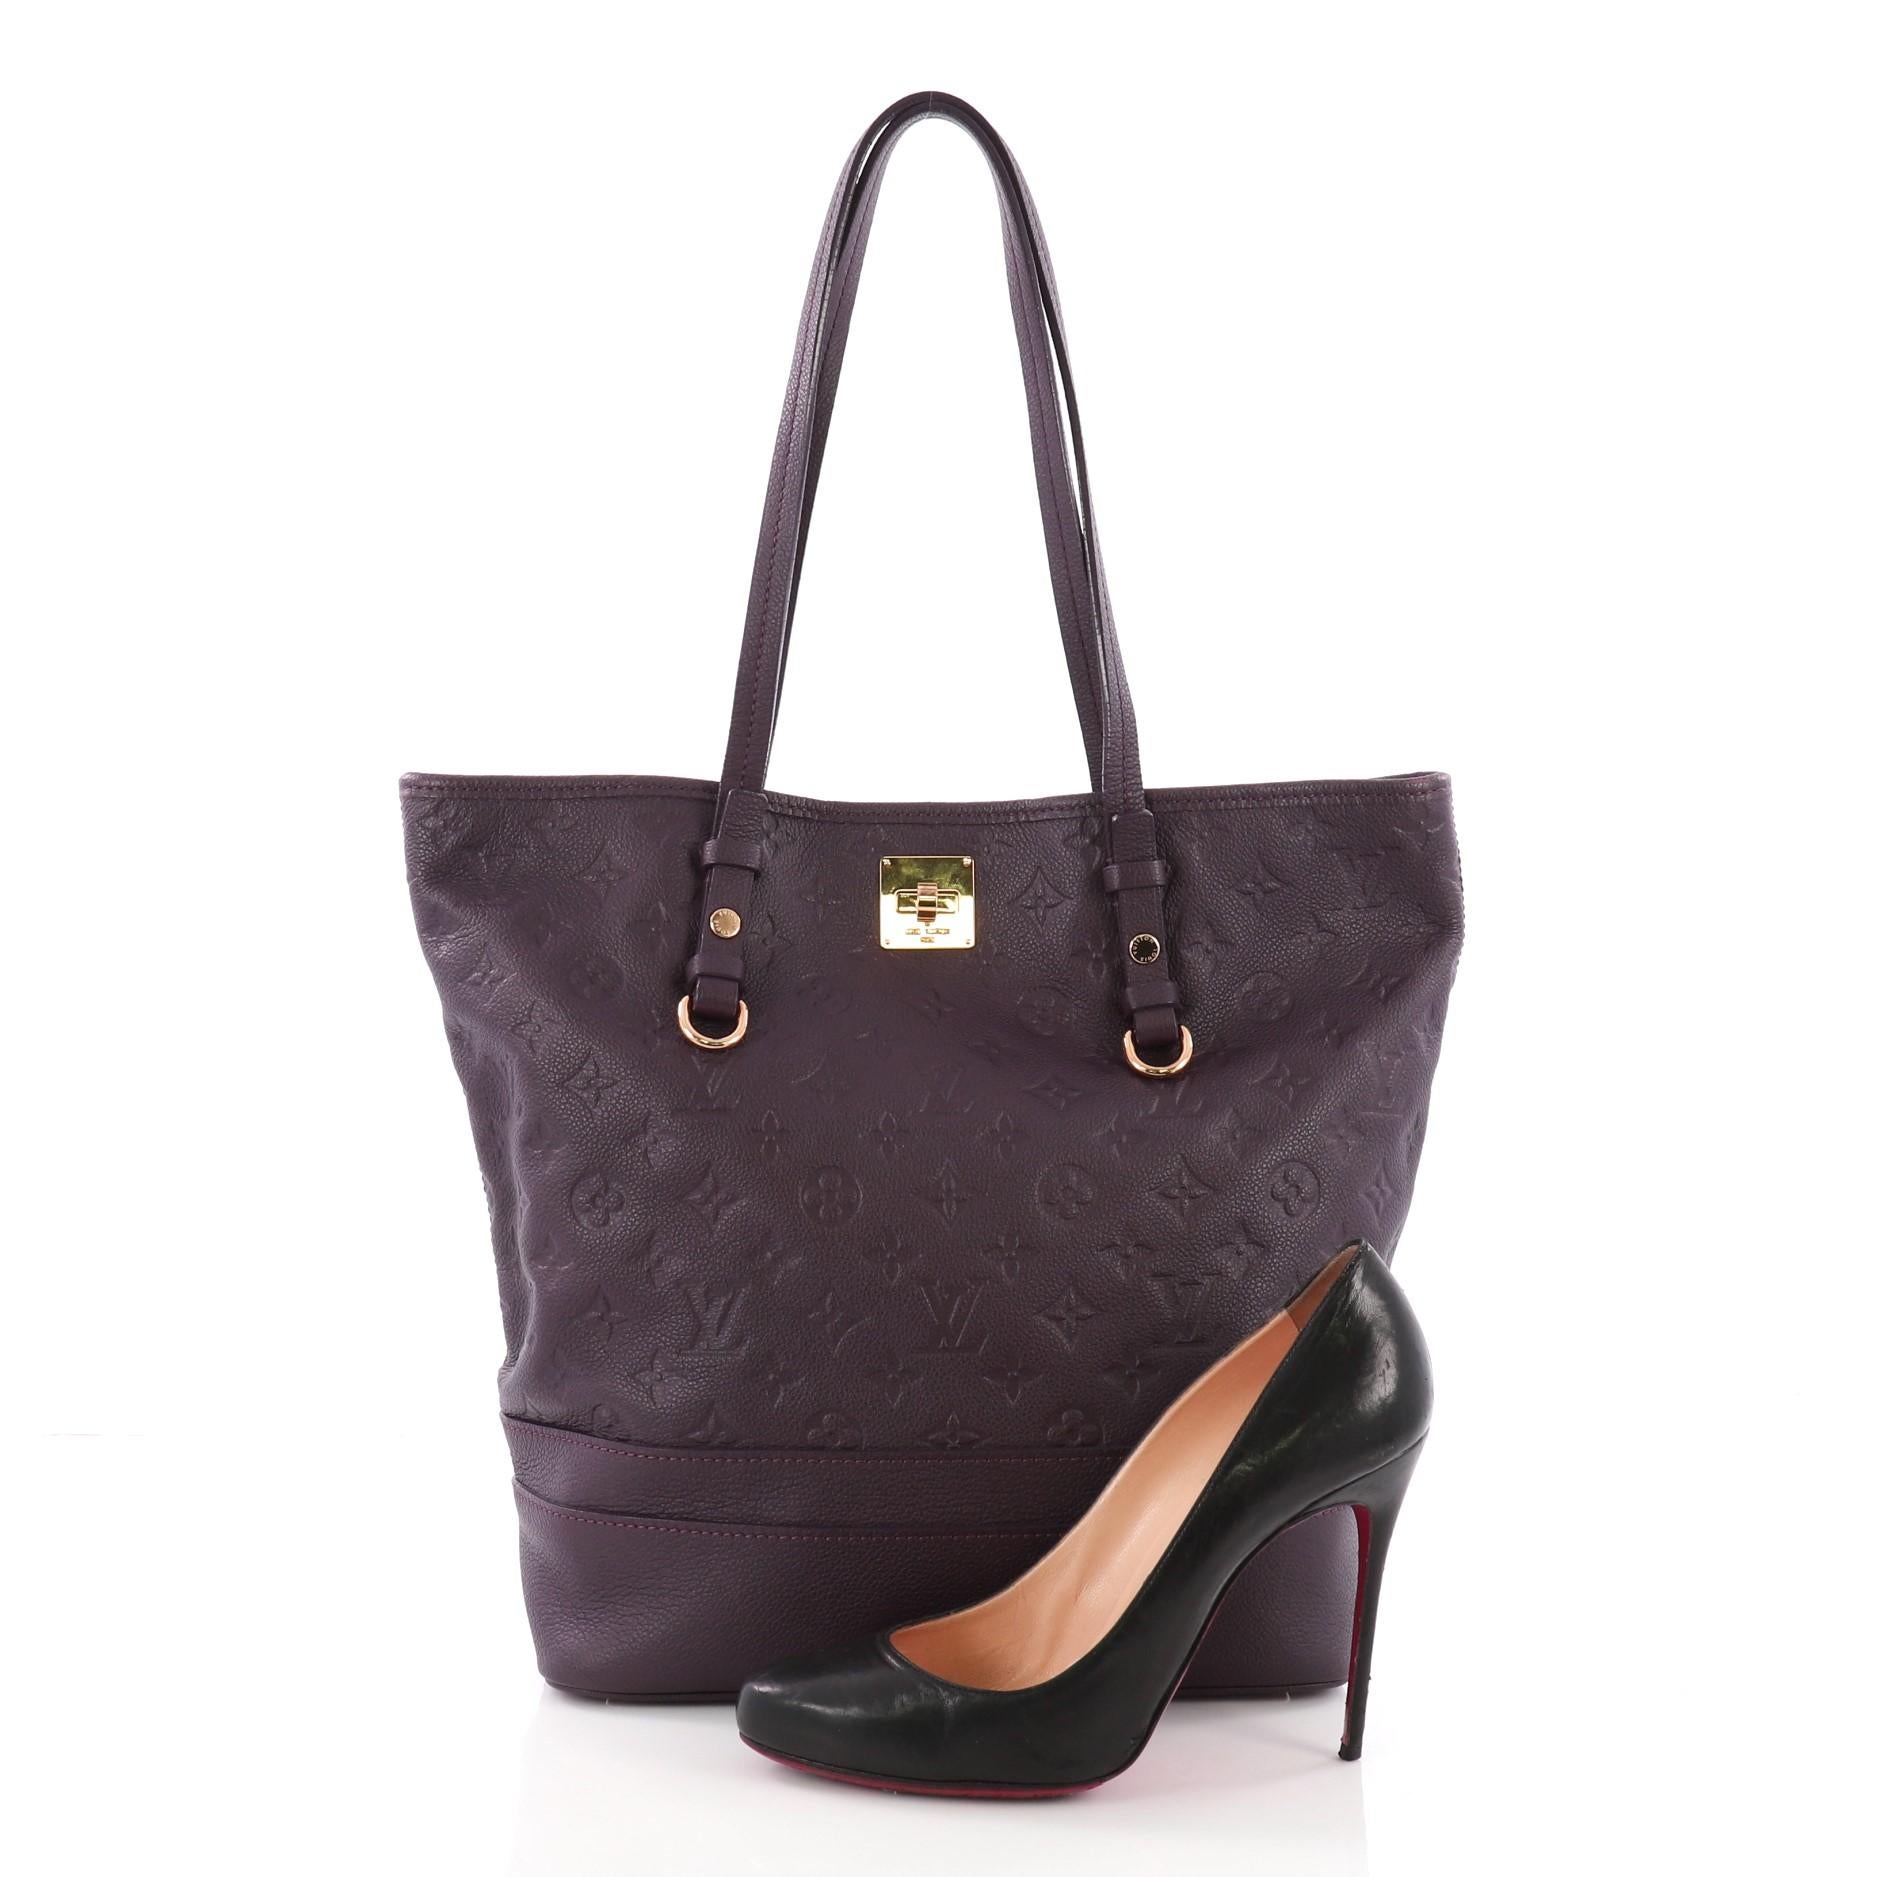 This Louis Vuitton Citadine Handbag Monogram Empreinte Leather PM, crafted in purple embossed monogram empreinte leather, features slim handles, protective base studs and gold-tone hardware. Its turn-lock closure opens to a purple fabric interior.